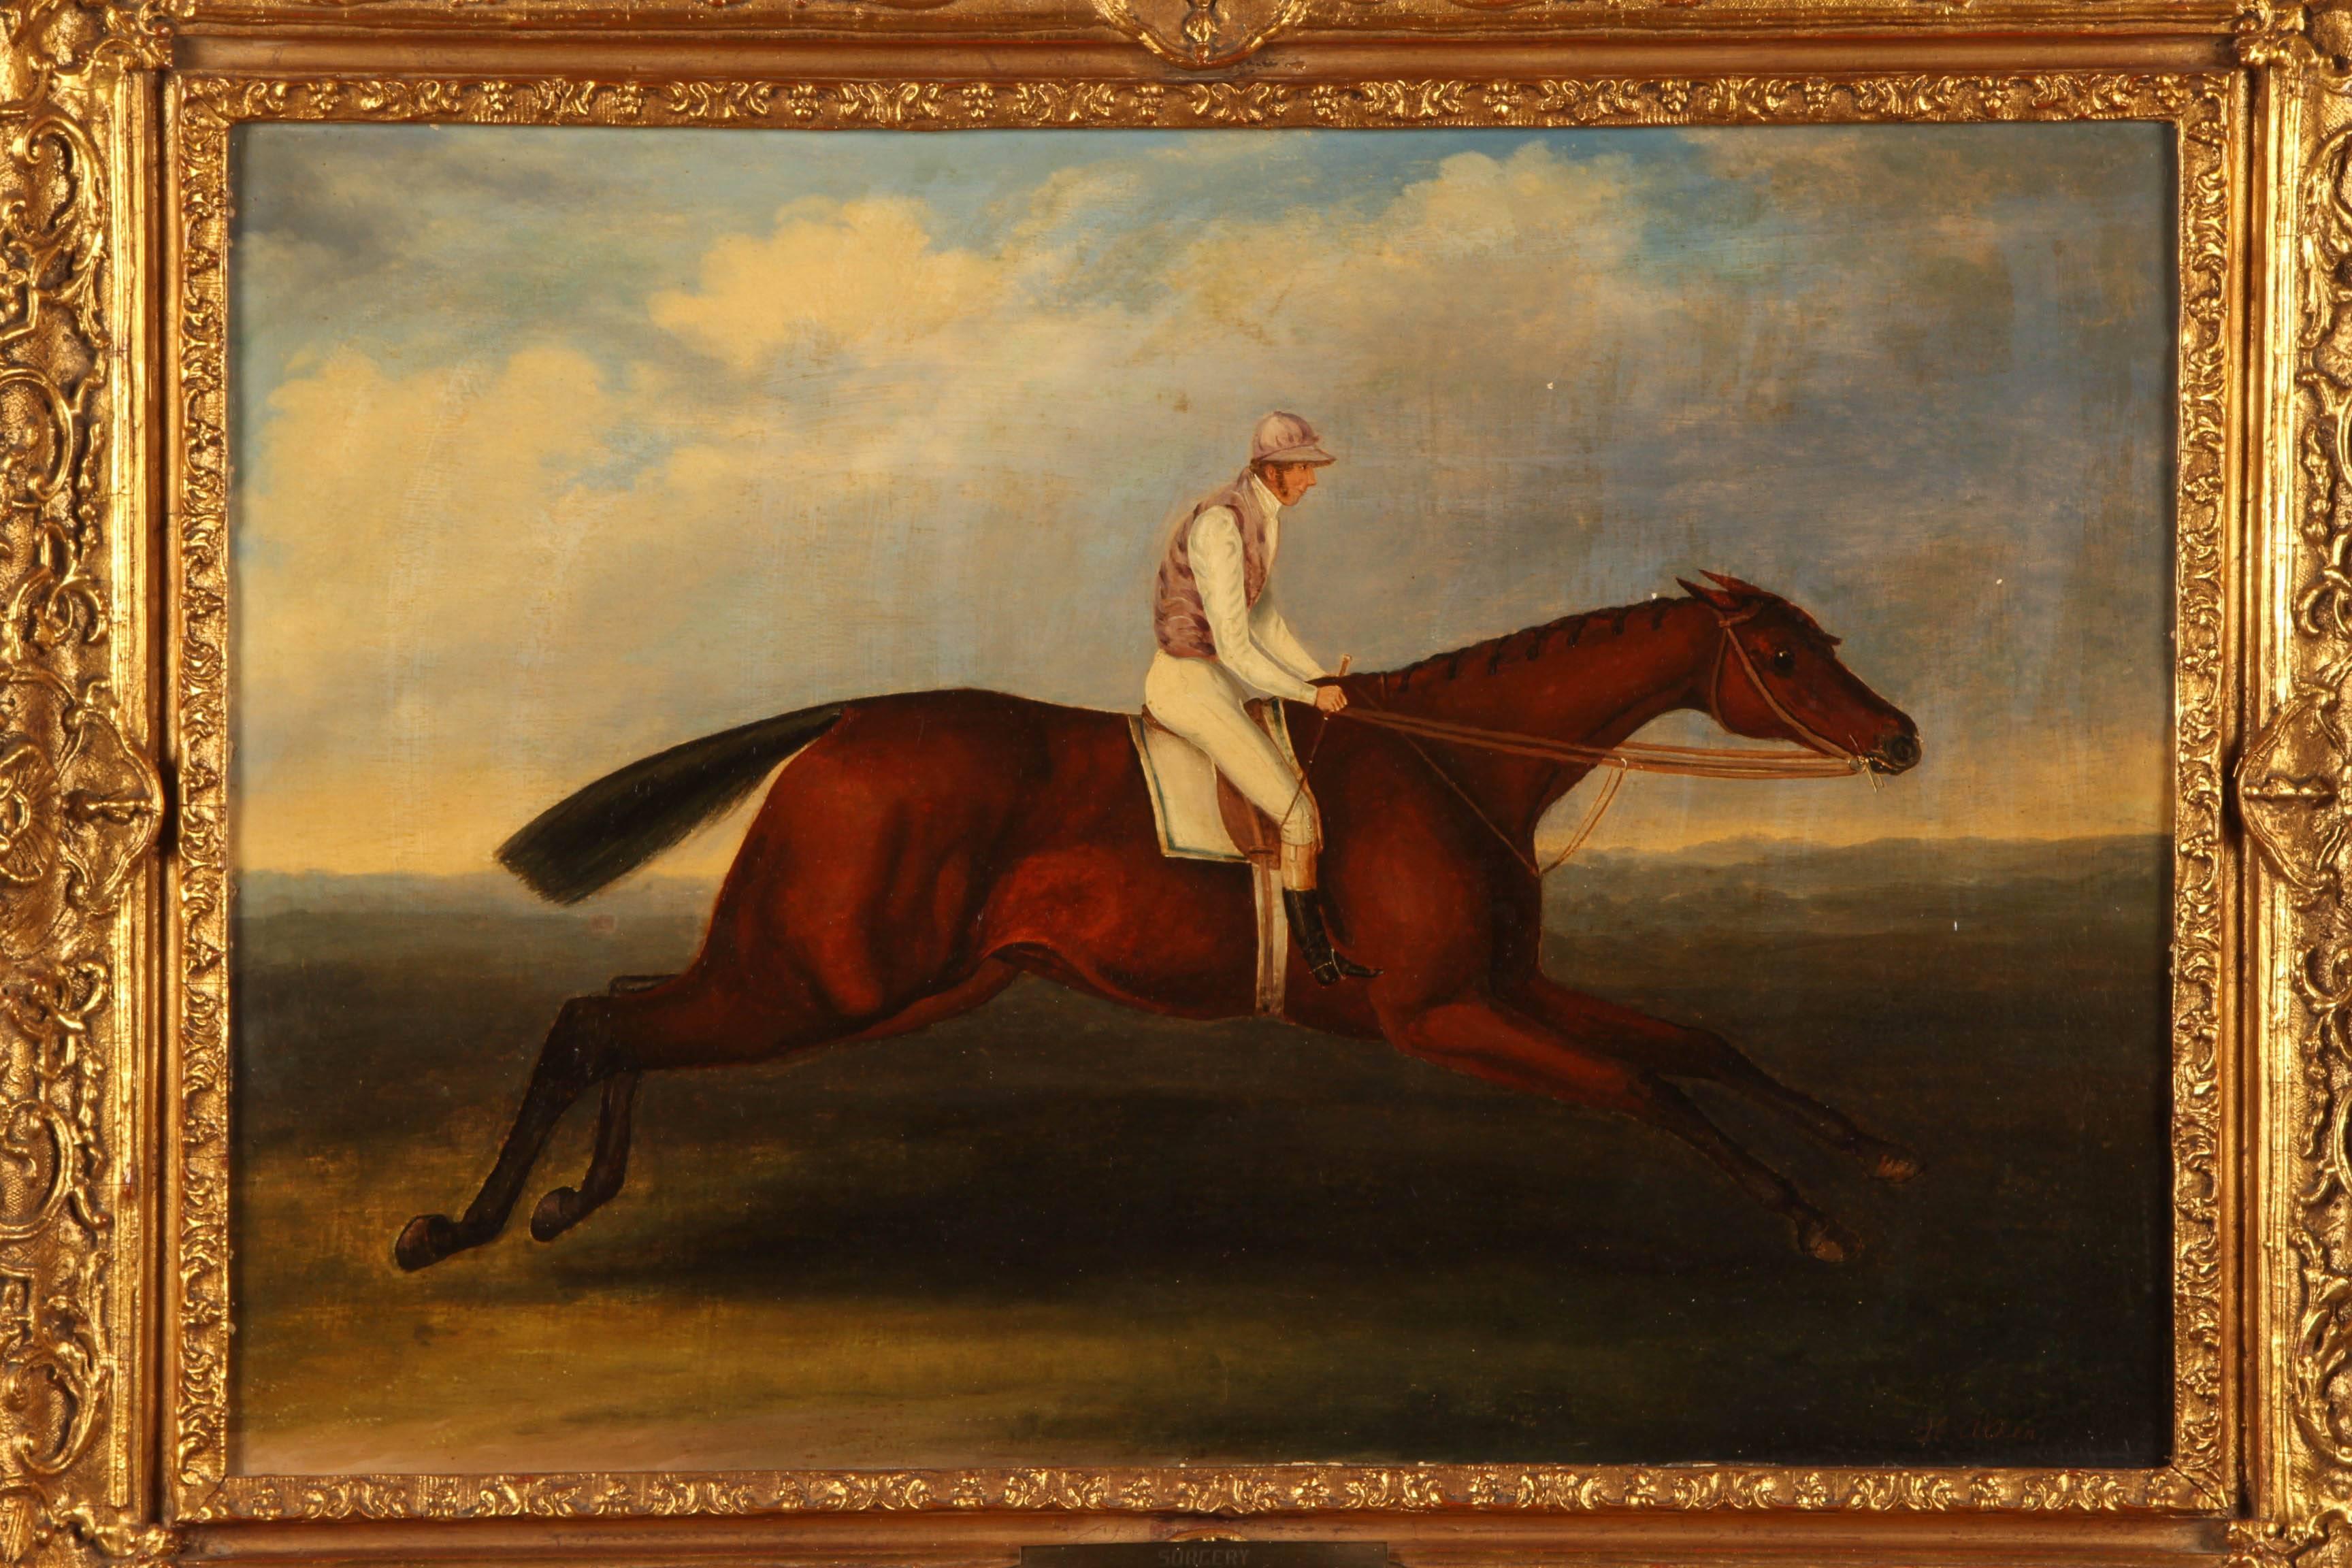 Henry Alken was a prolific artist and is desirable among collectors of equine art. Image of the horse Sorcery, who won an important race in 1811; a jockey riding a running horse in a pasture; with a blue and cloudy sky, within a carved gilt frame.